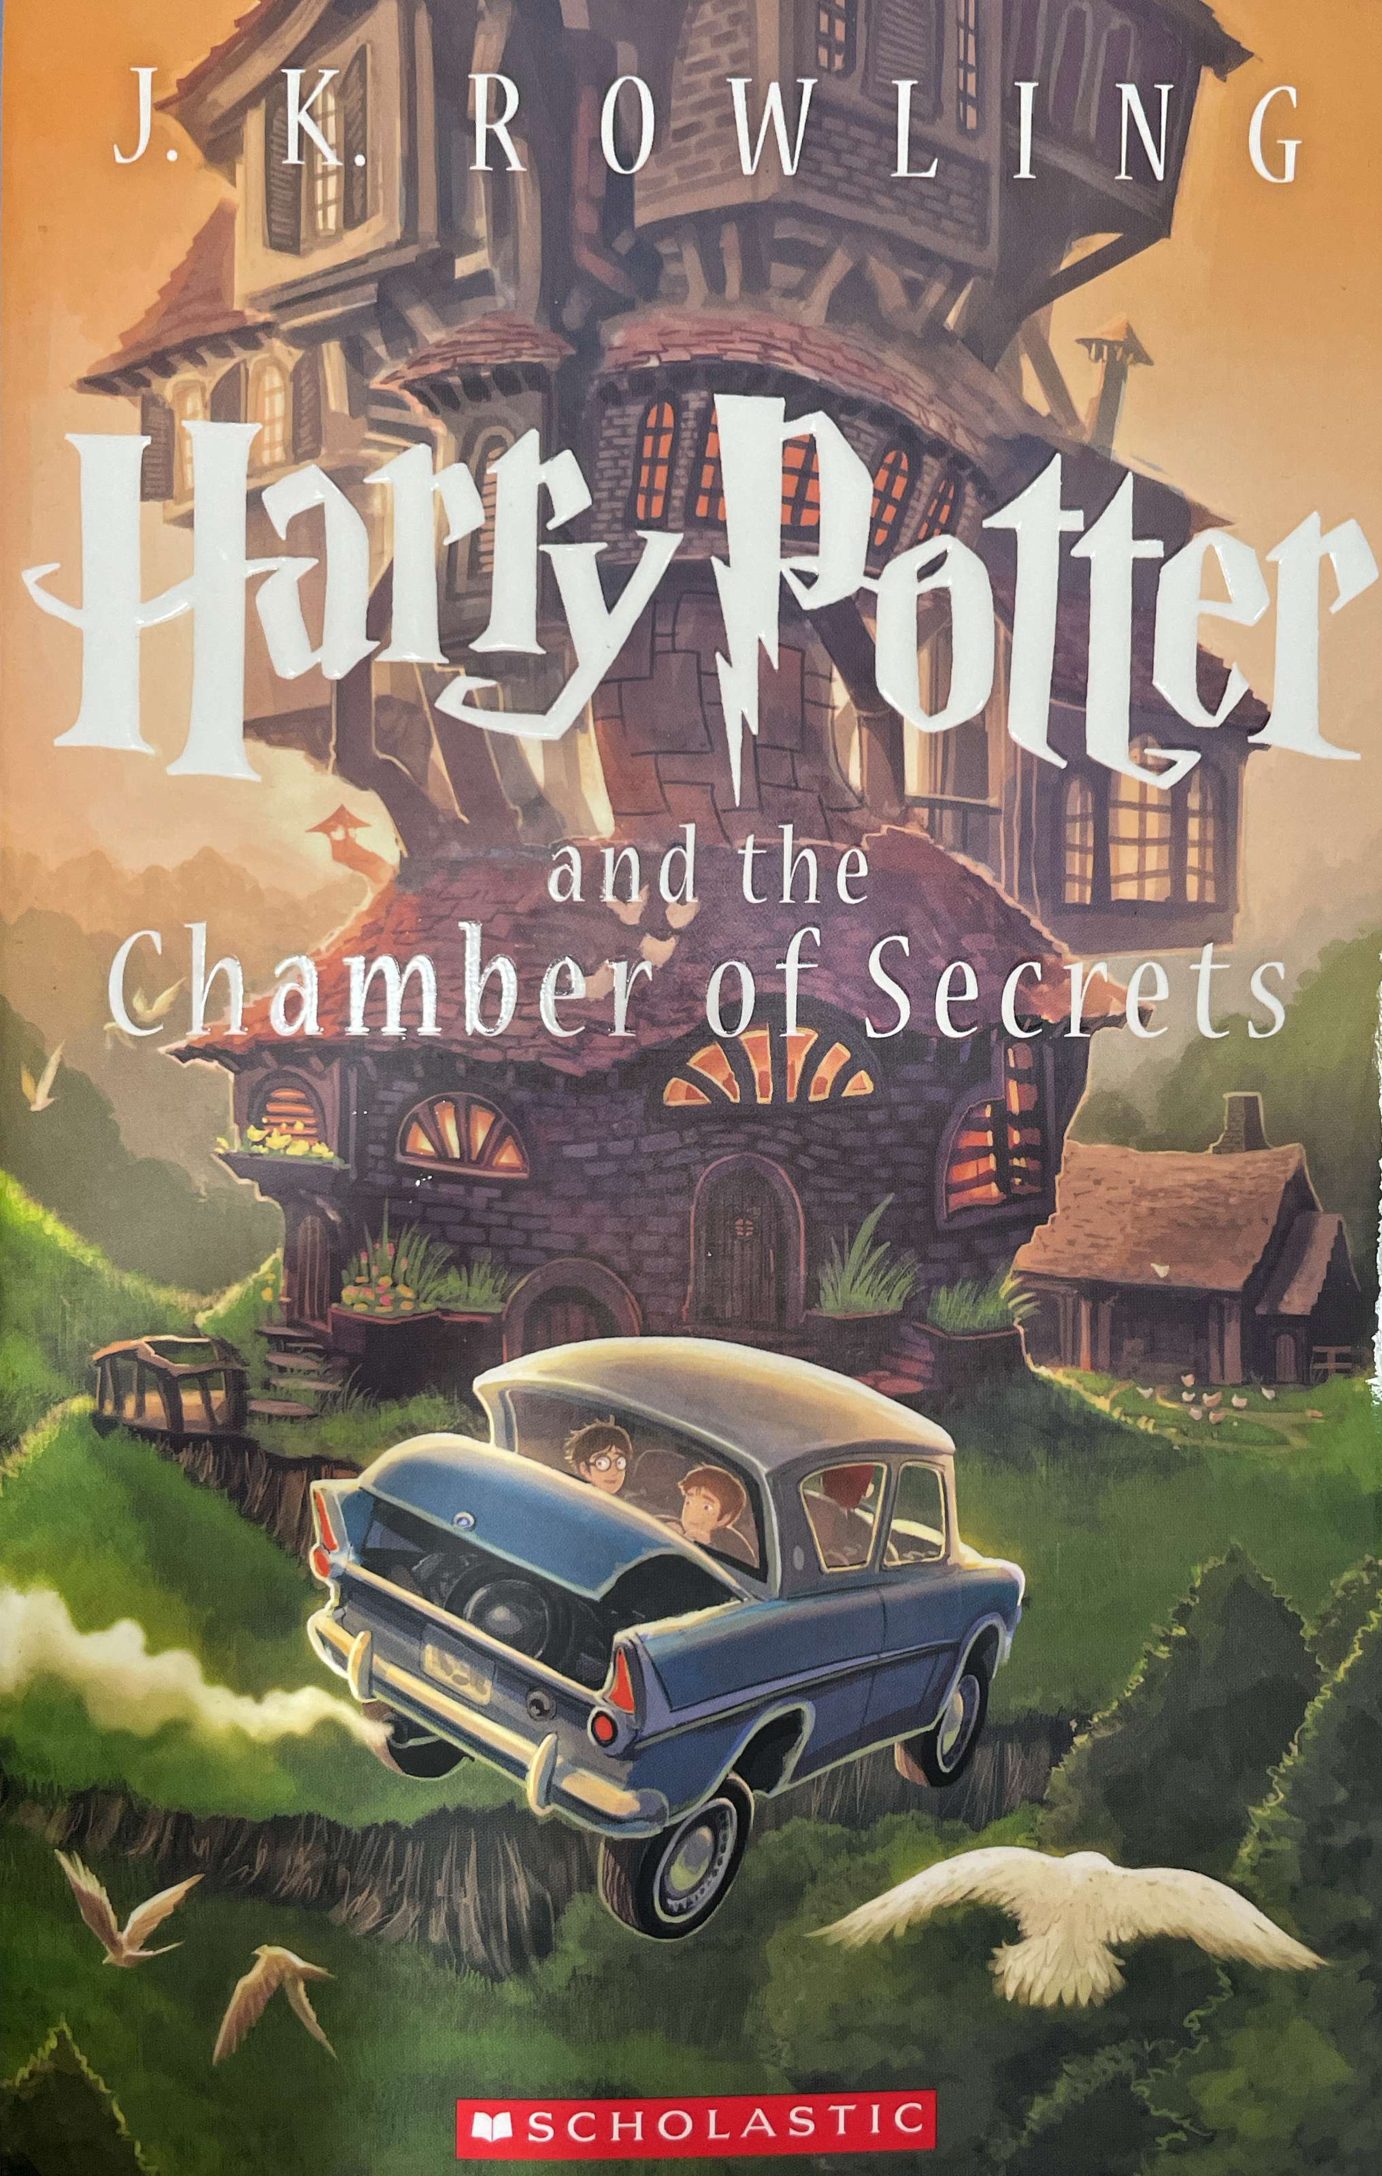 BOOK REVIEW: Harry Potter and the Chamber of Secrets